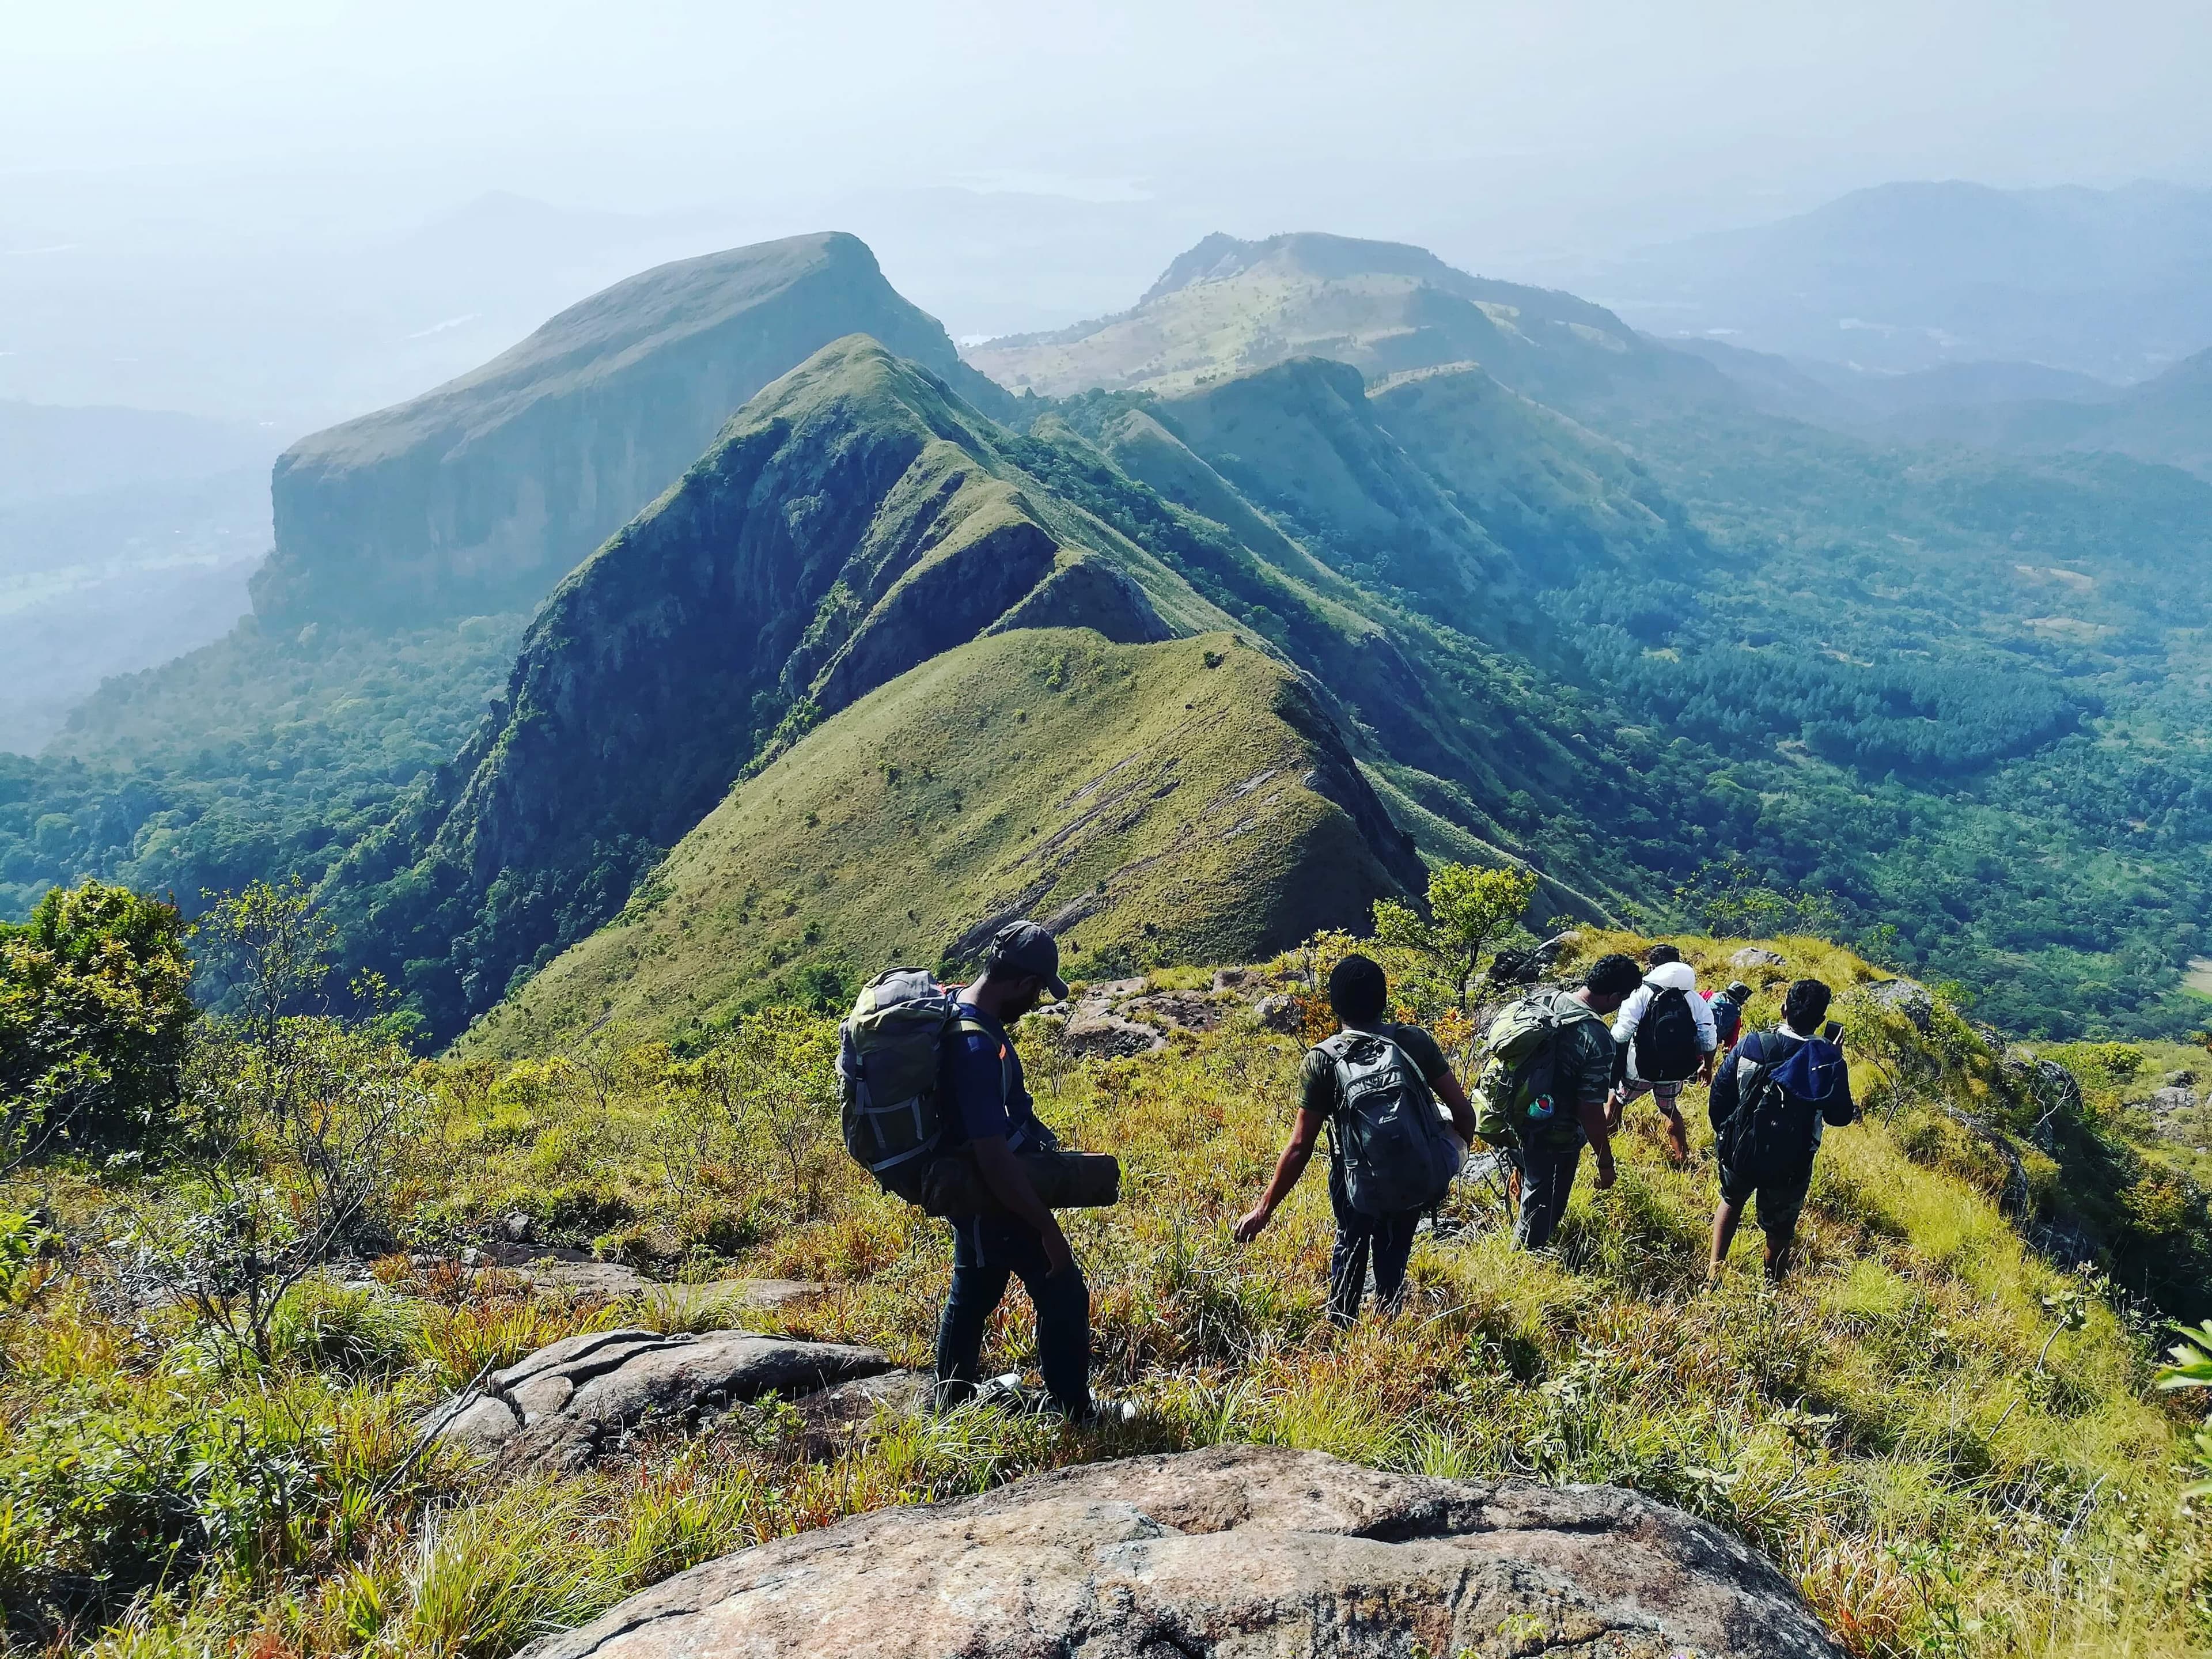 A group of tourists trekking in beautiful Knuckles mountain in Sri Lanka